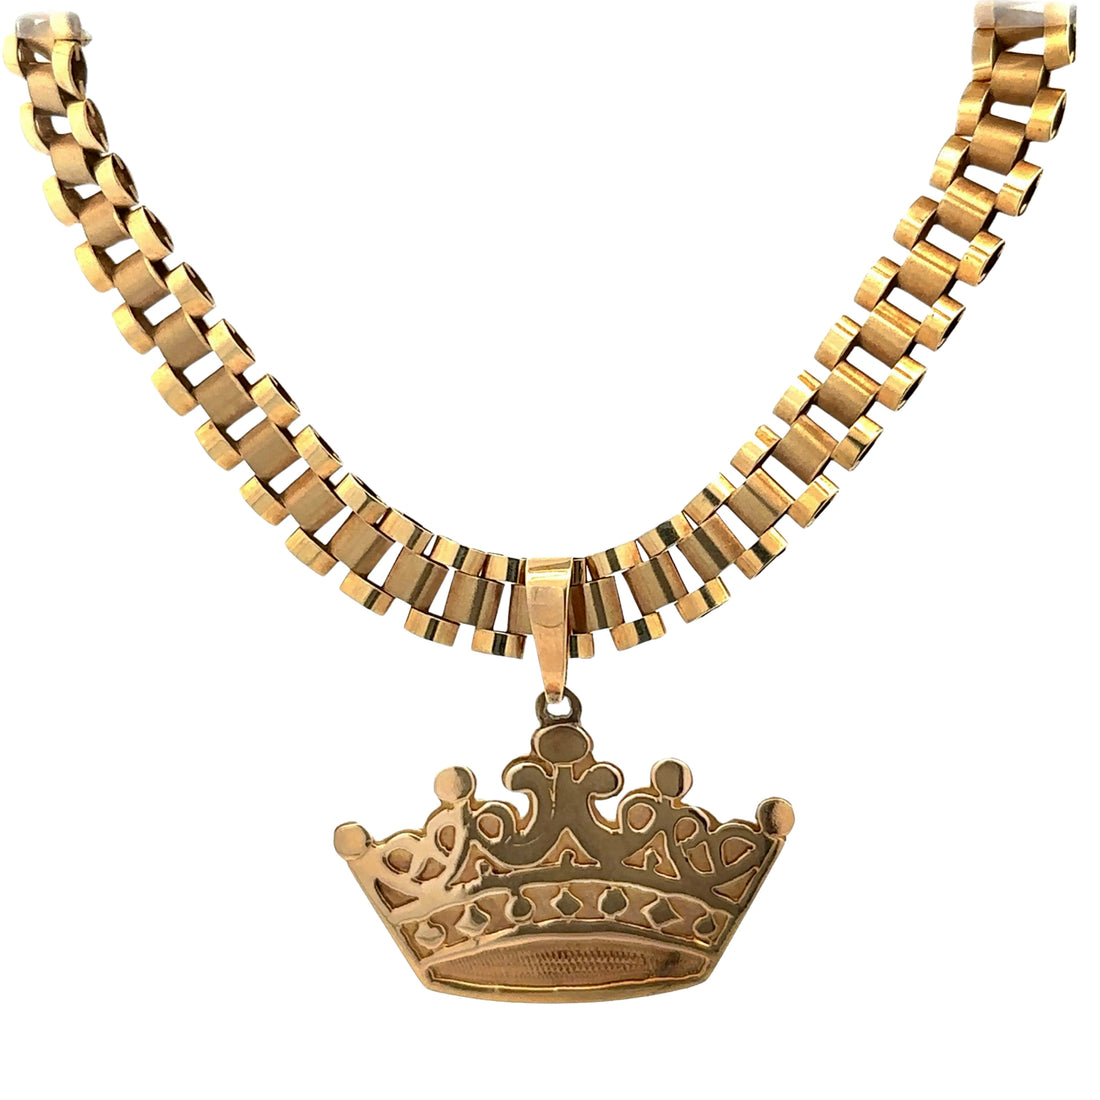 Rolex Style Chain Gold Plated Crown Pendant Necklace 10mm Width